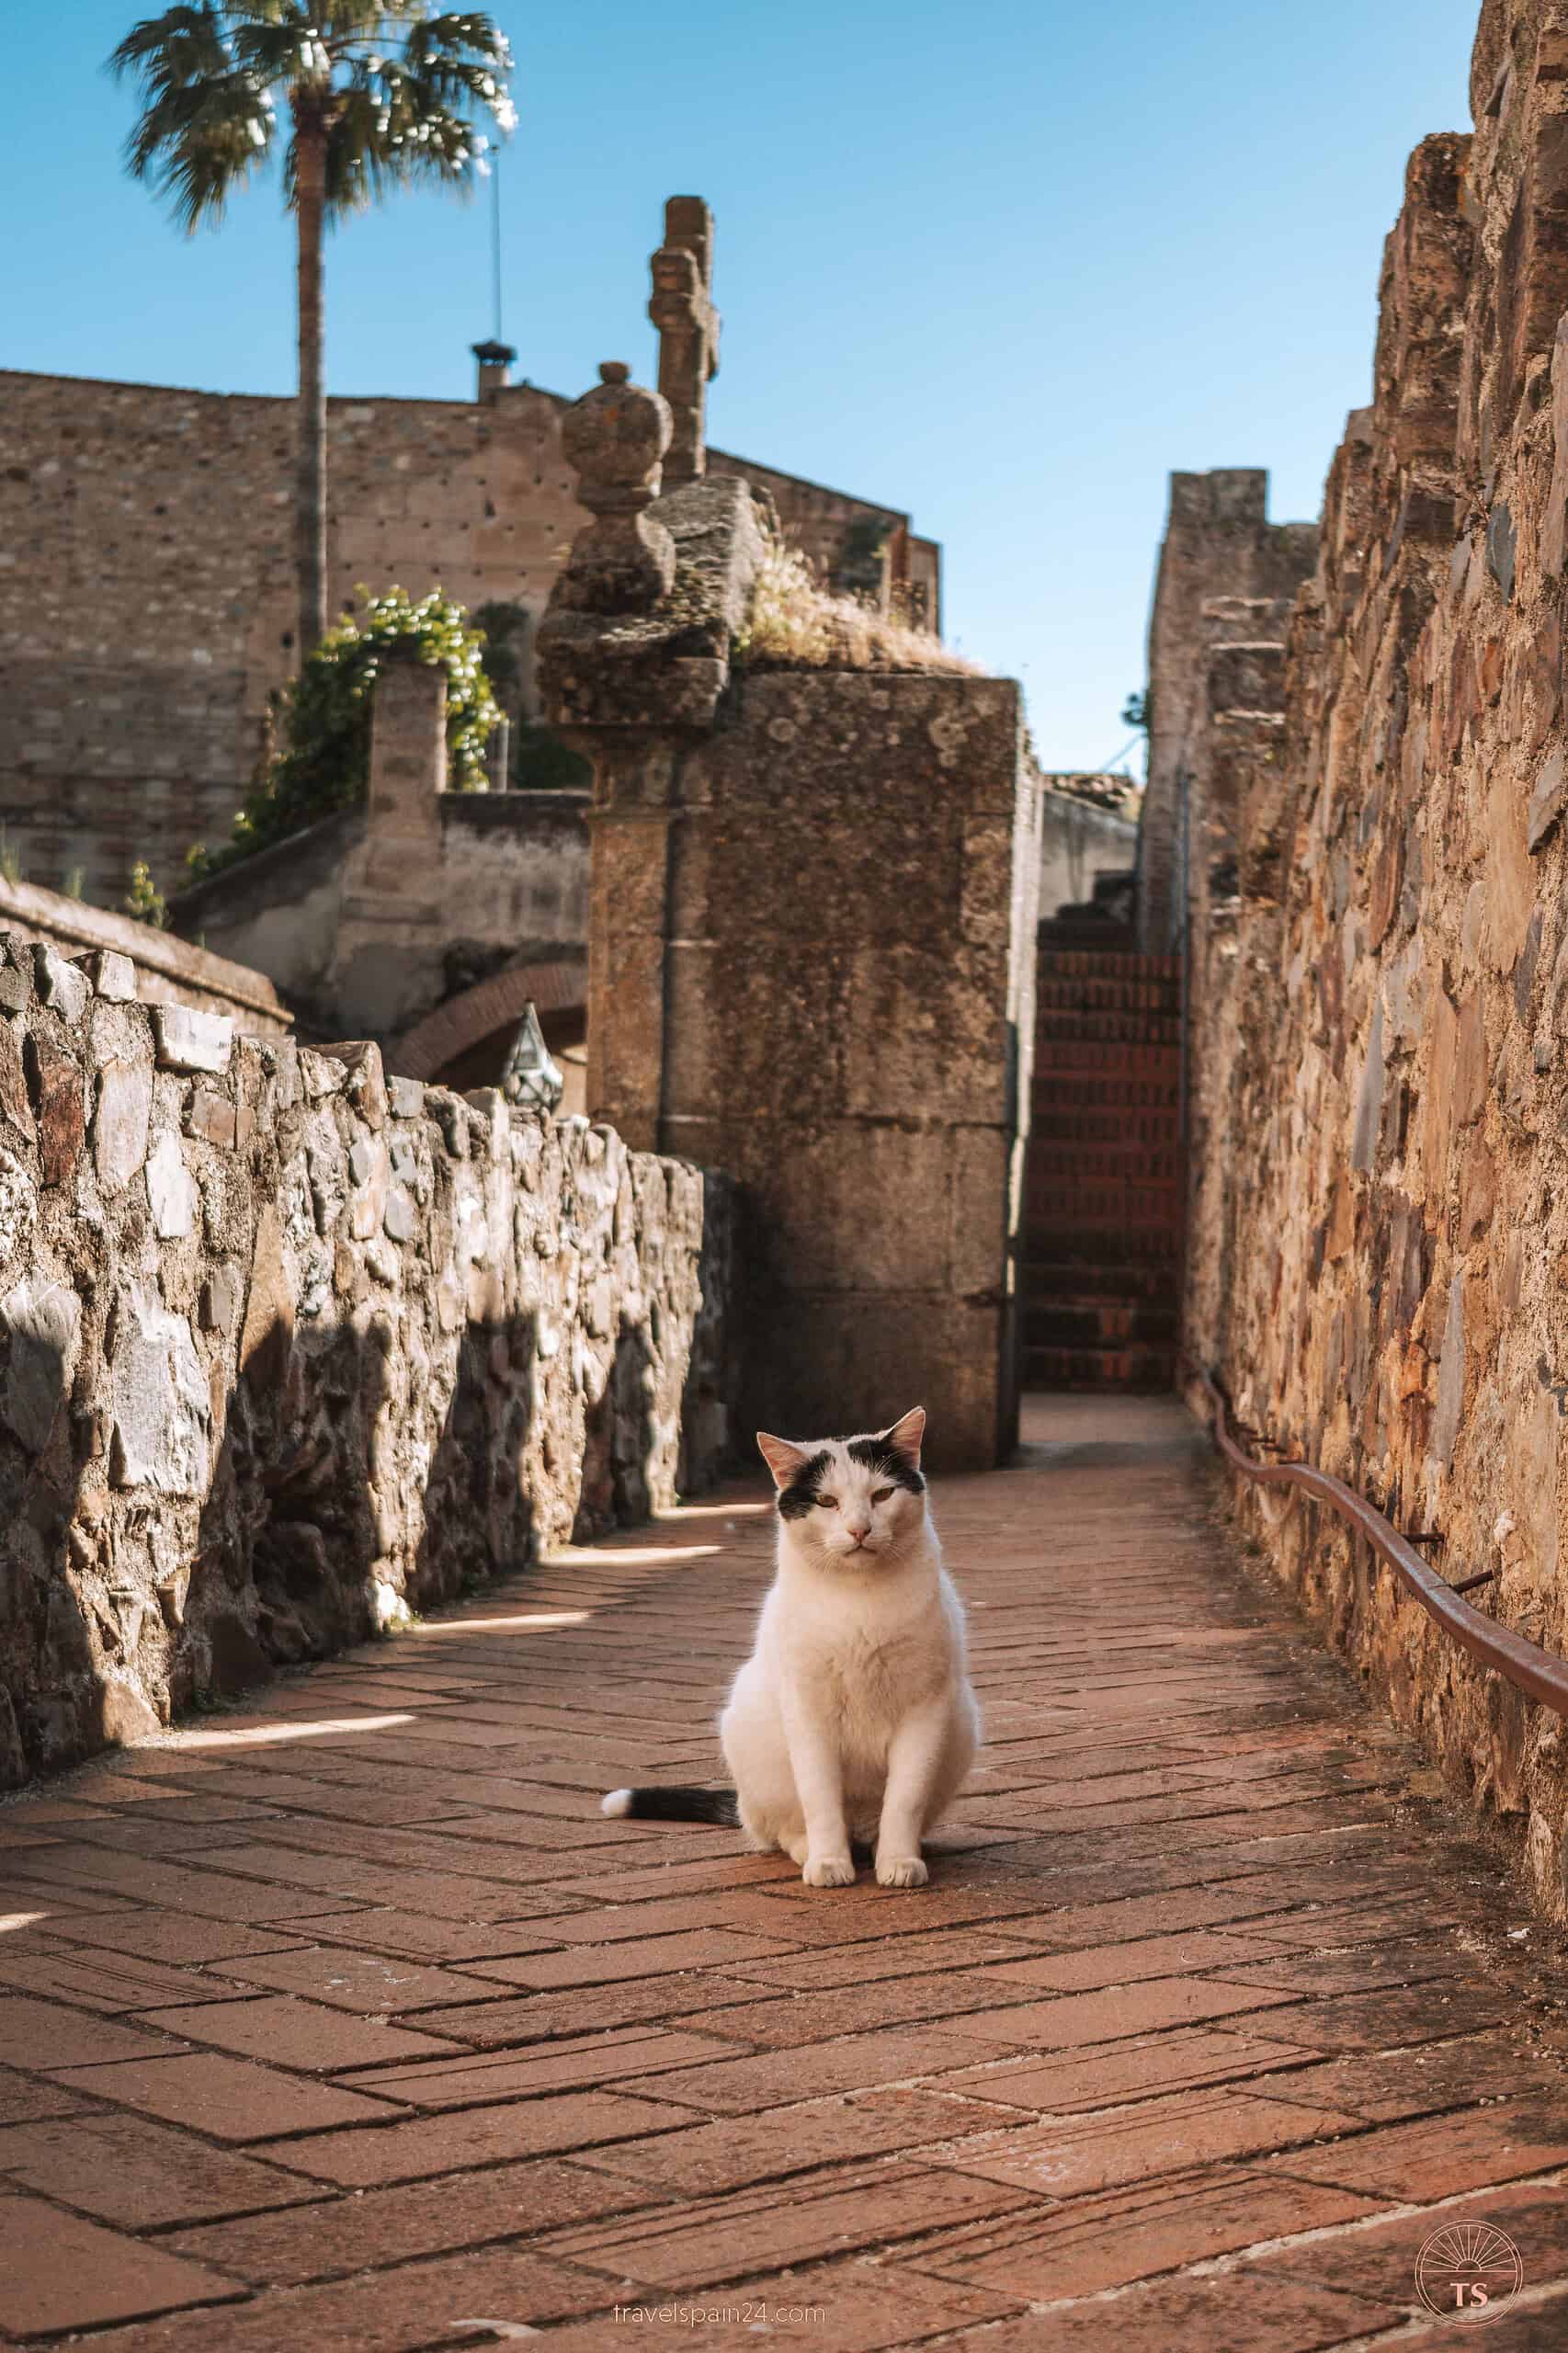 Another charming cat encounter, this time perched on the old city walls by Torre de Bujaco in Cáceres, adding a touch of whimsy to our exploration.